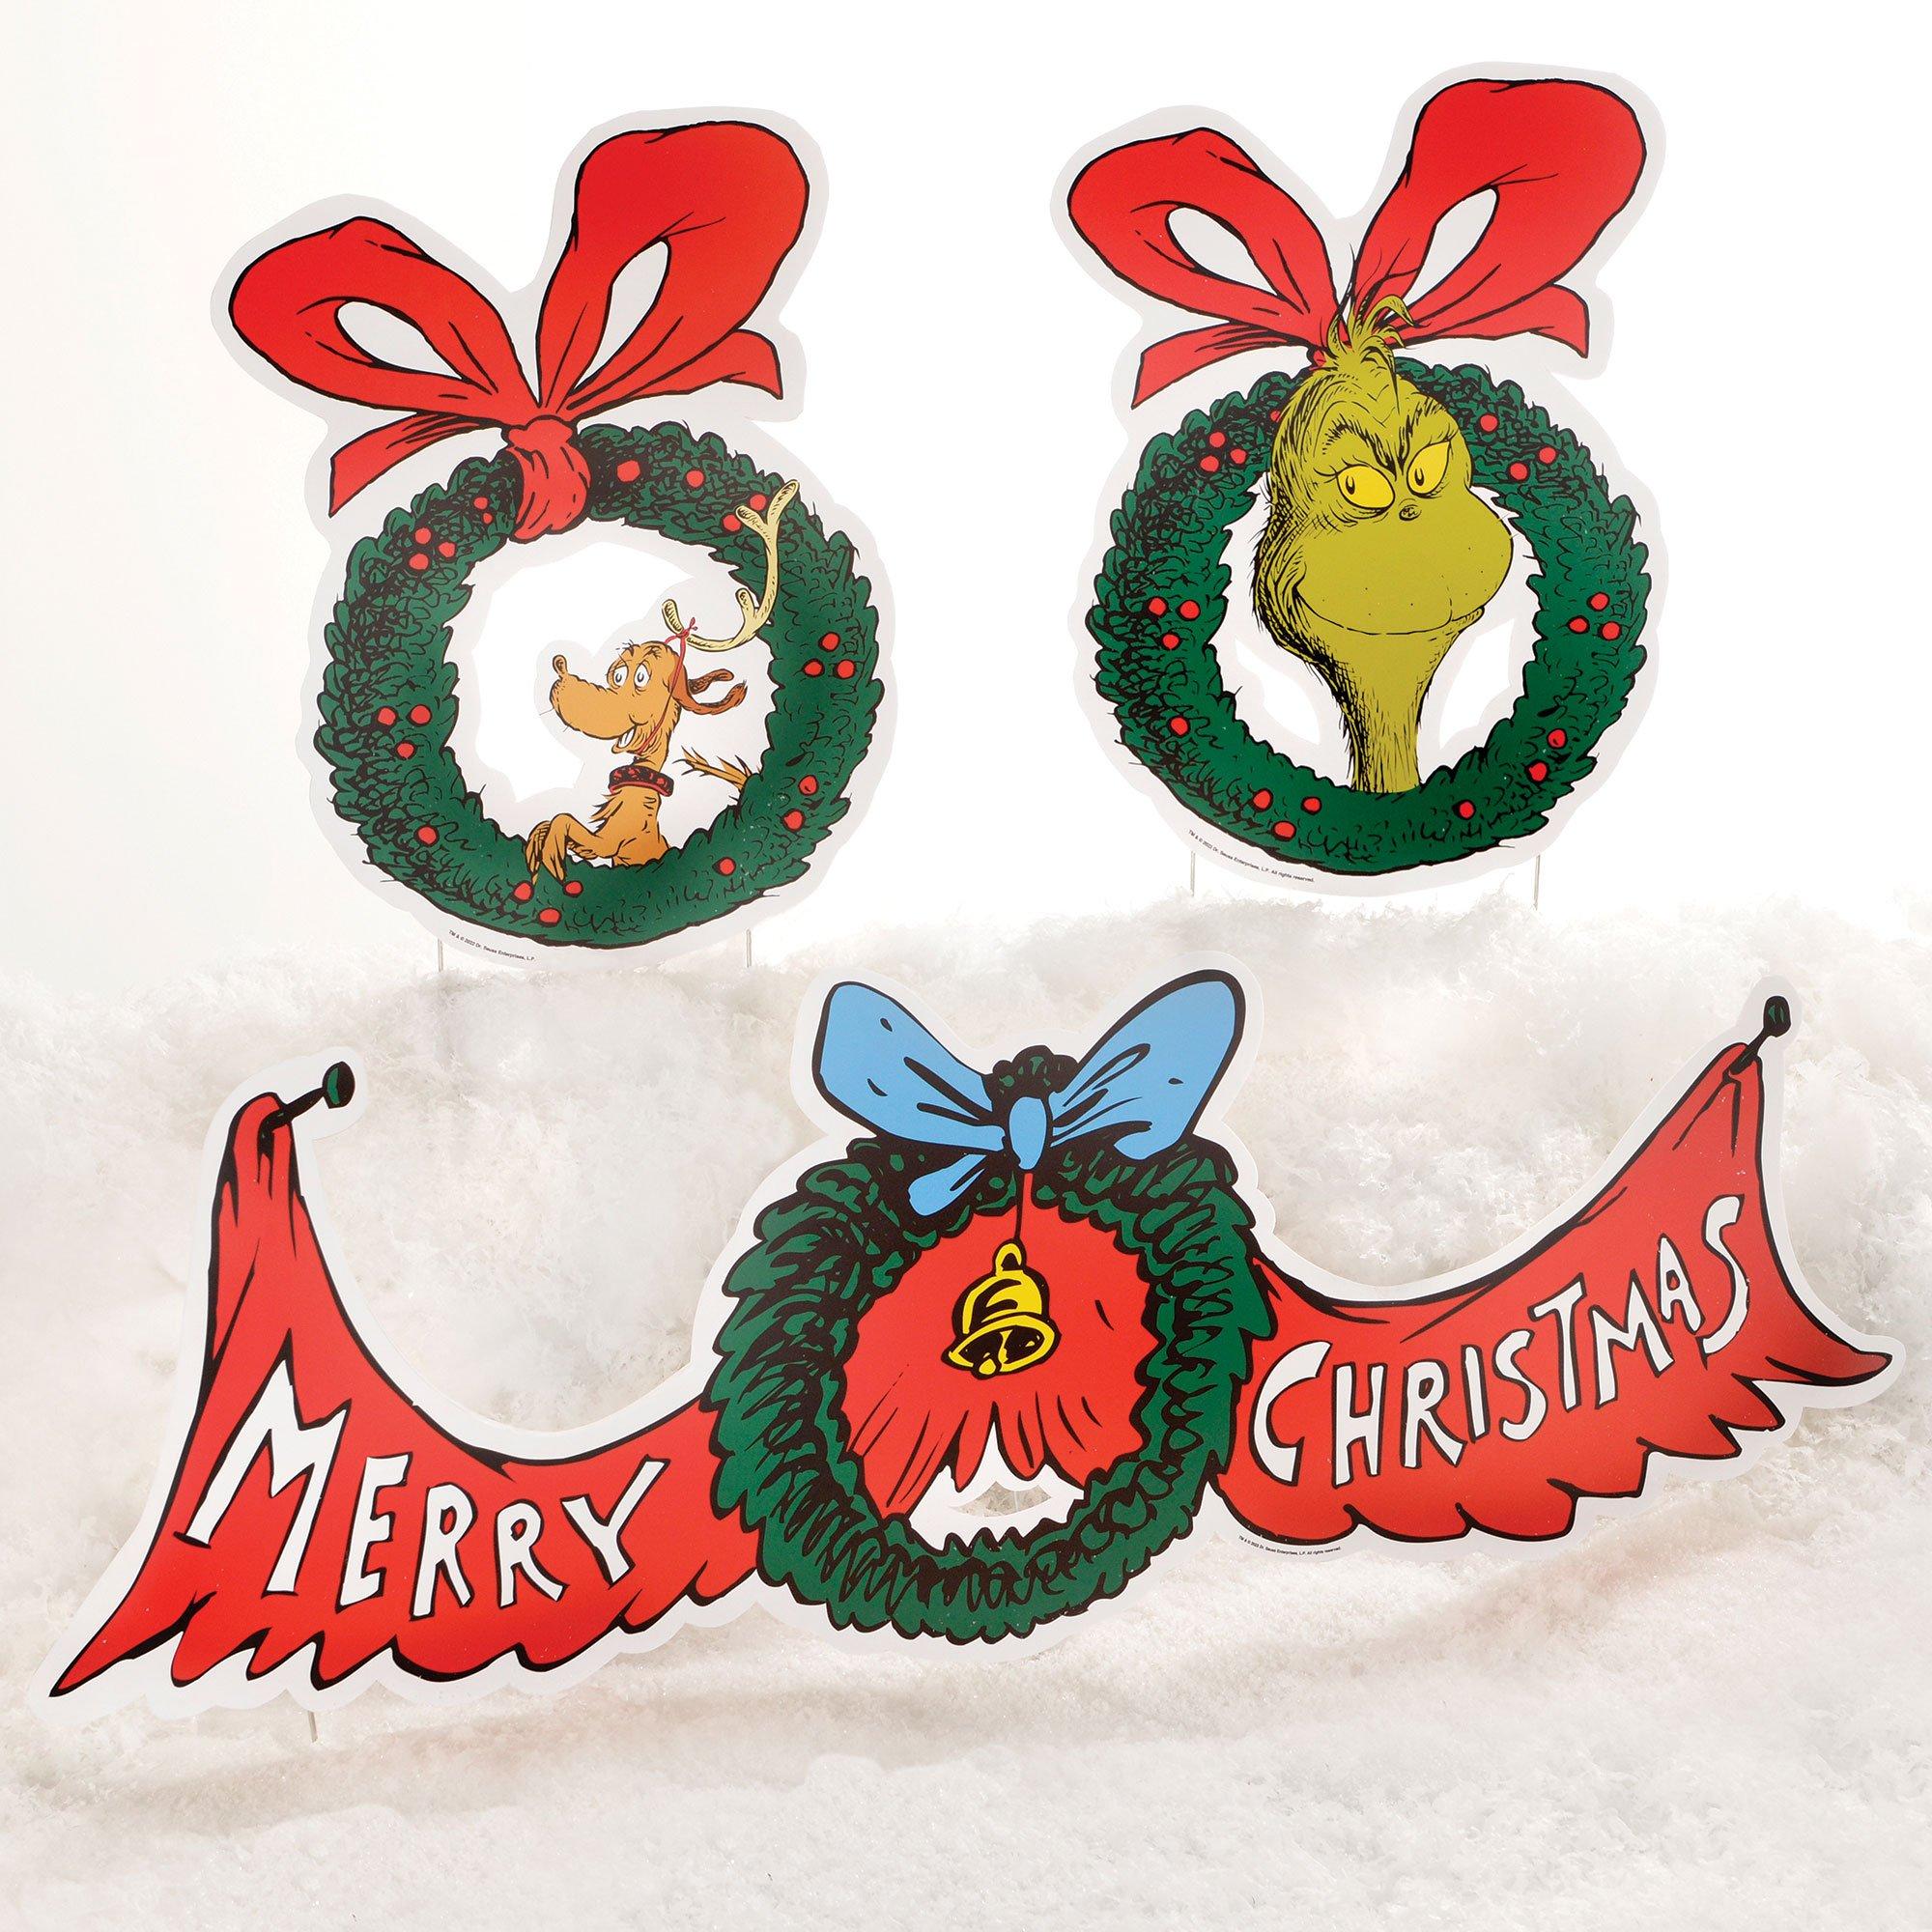 Grinch Merry Christmas Corrugated Plastic Yard Sign Set, 3pc - Dr